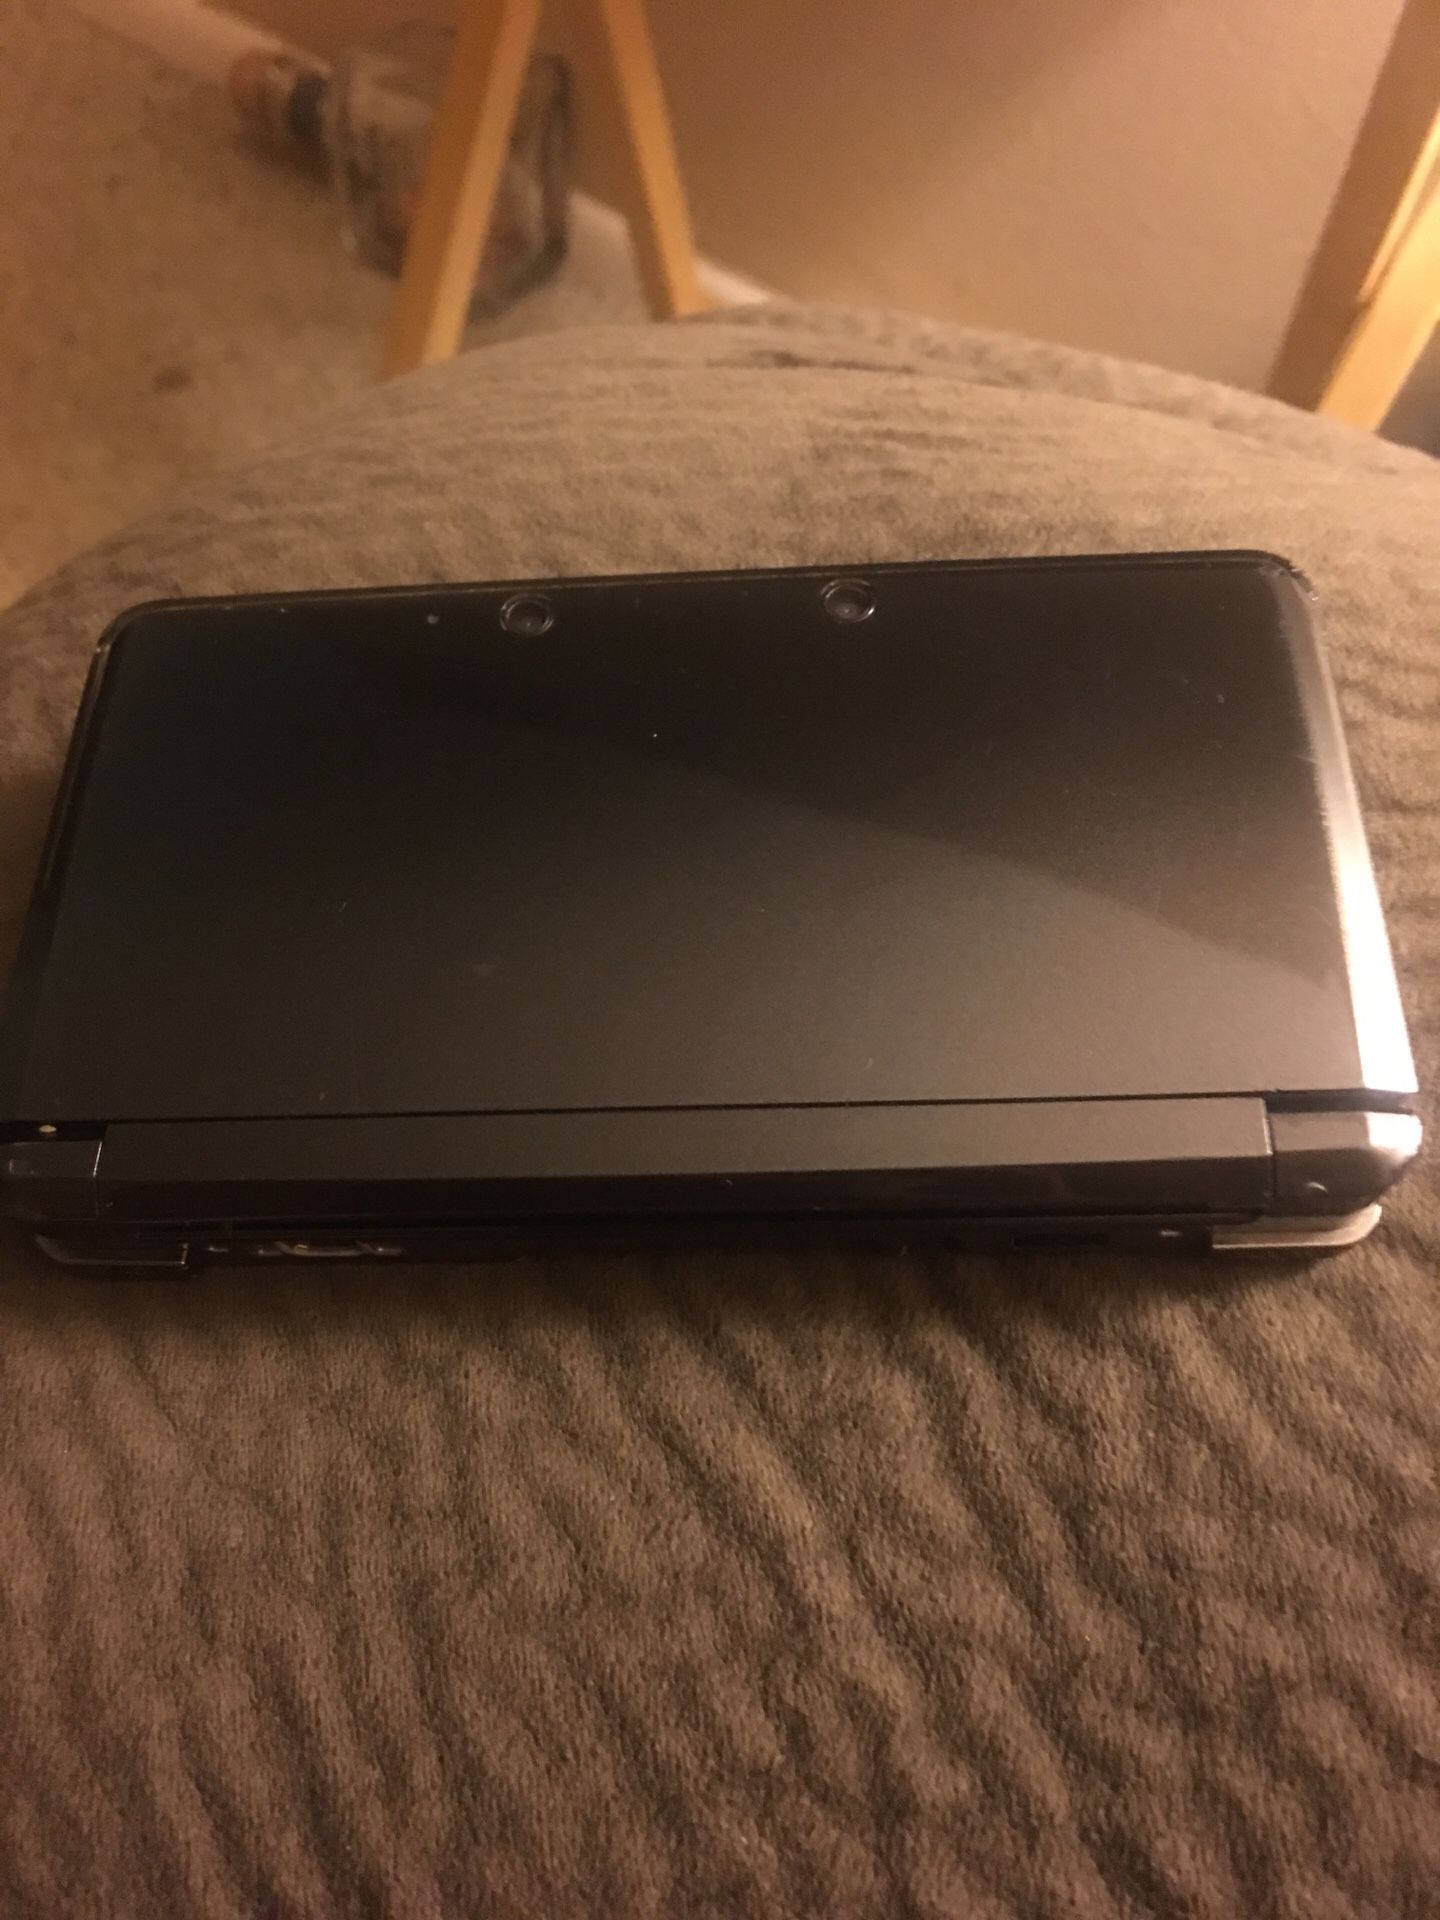 Nintendo 3DS triggers scratched